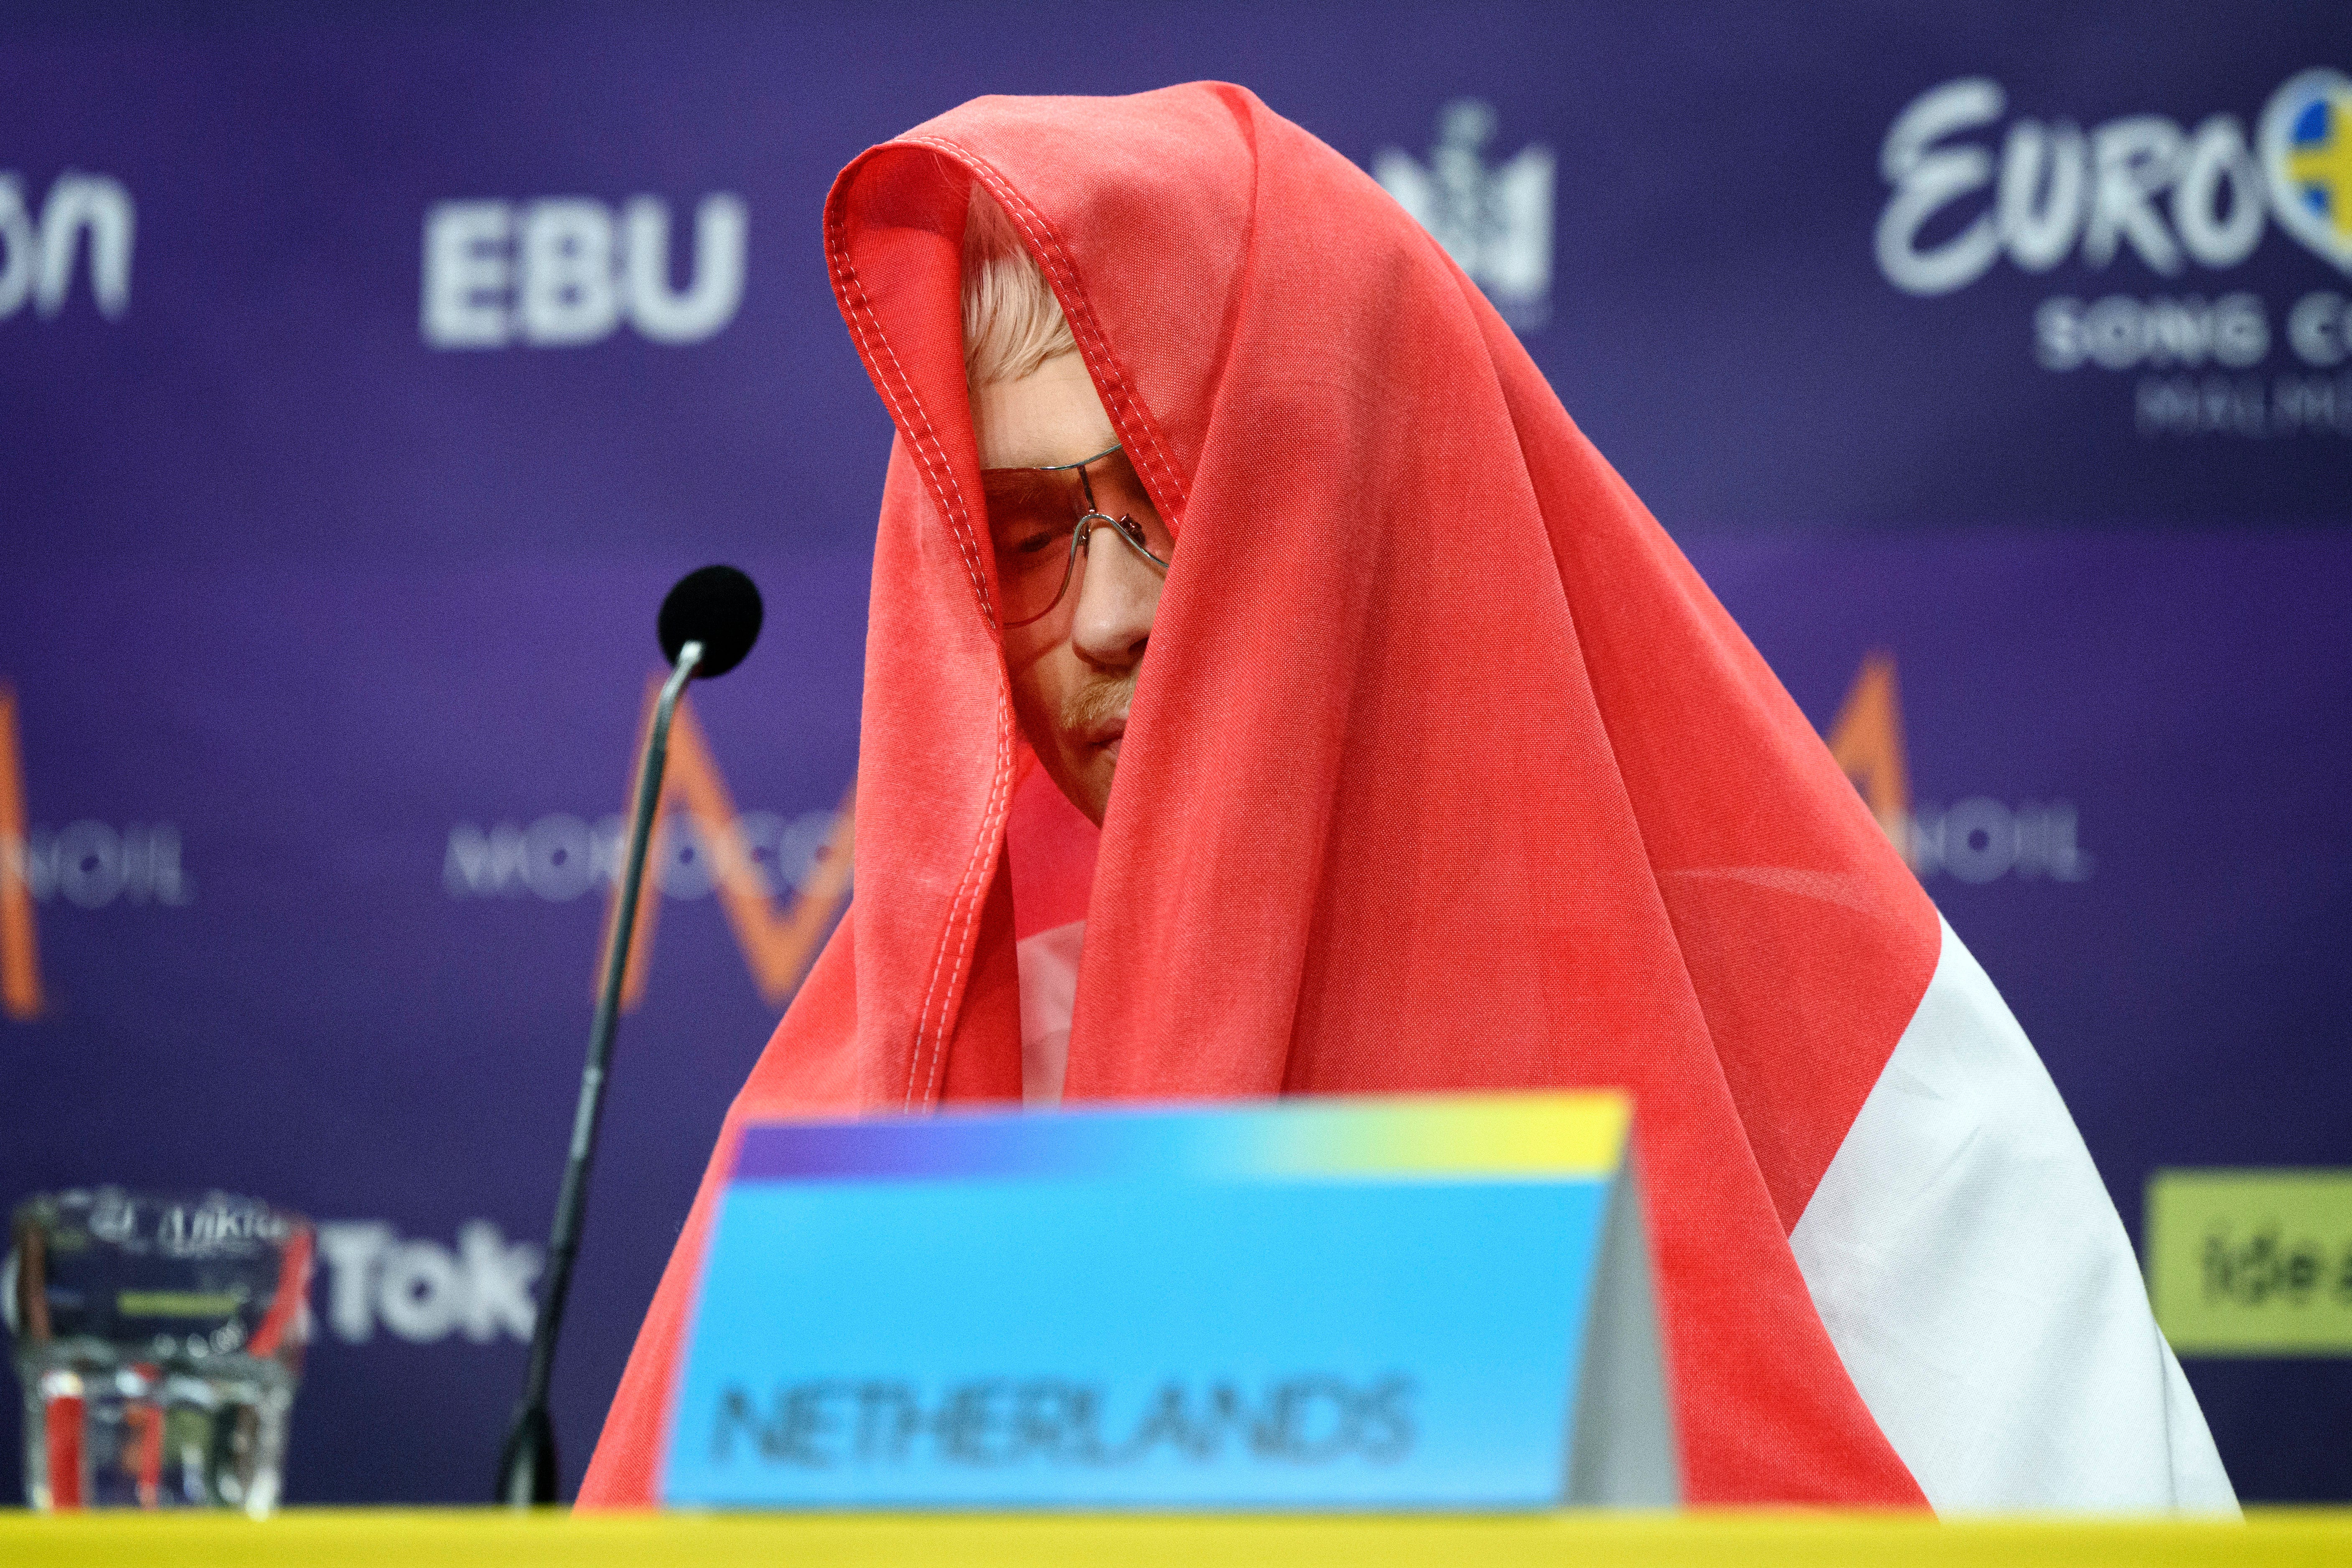 Joost Klein representing the Netherlands gestures, during a press conference after the second semi-final of the Eurovision Song Contest, at the Malmo Arena, in Malmo, Sweden